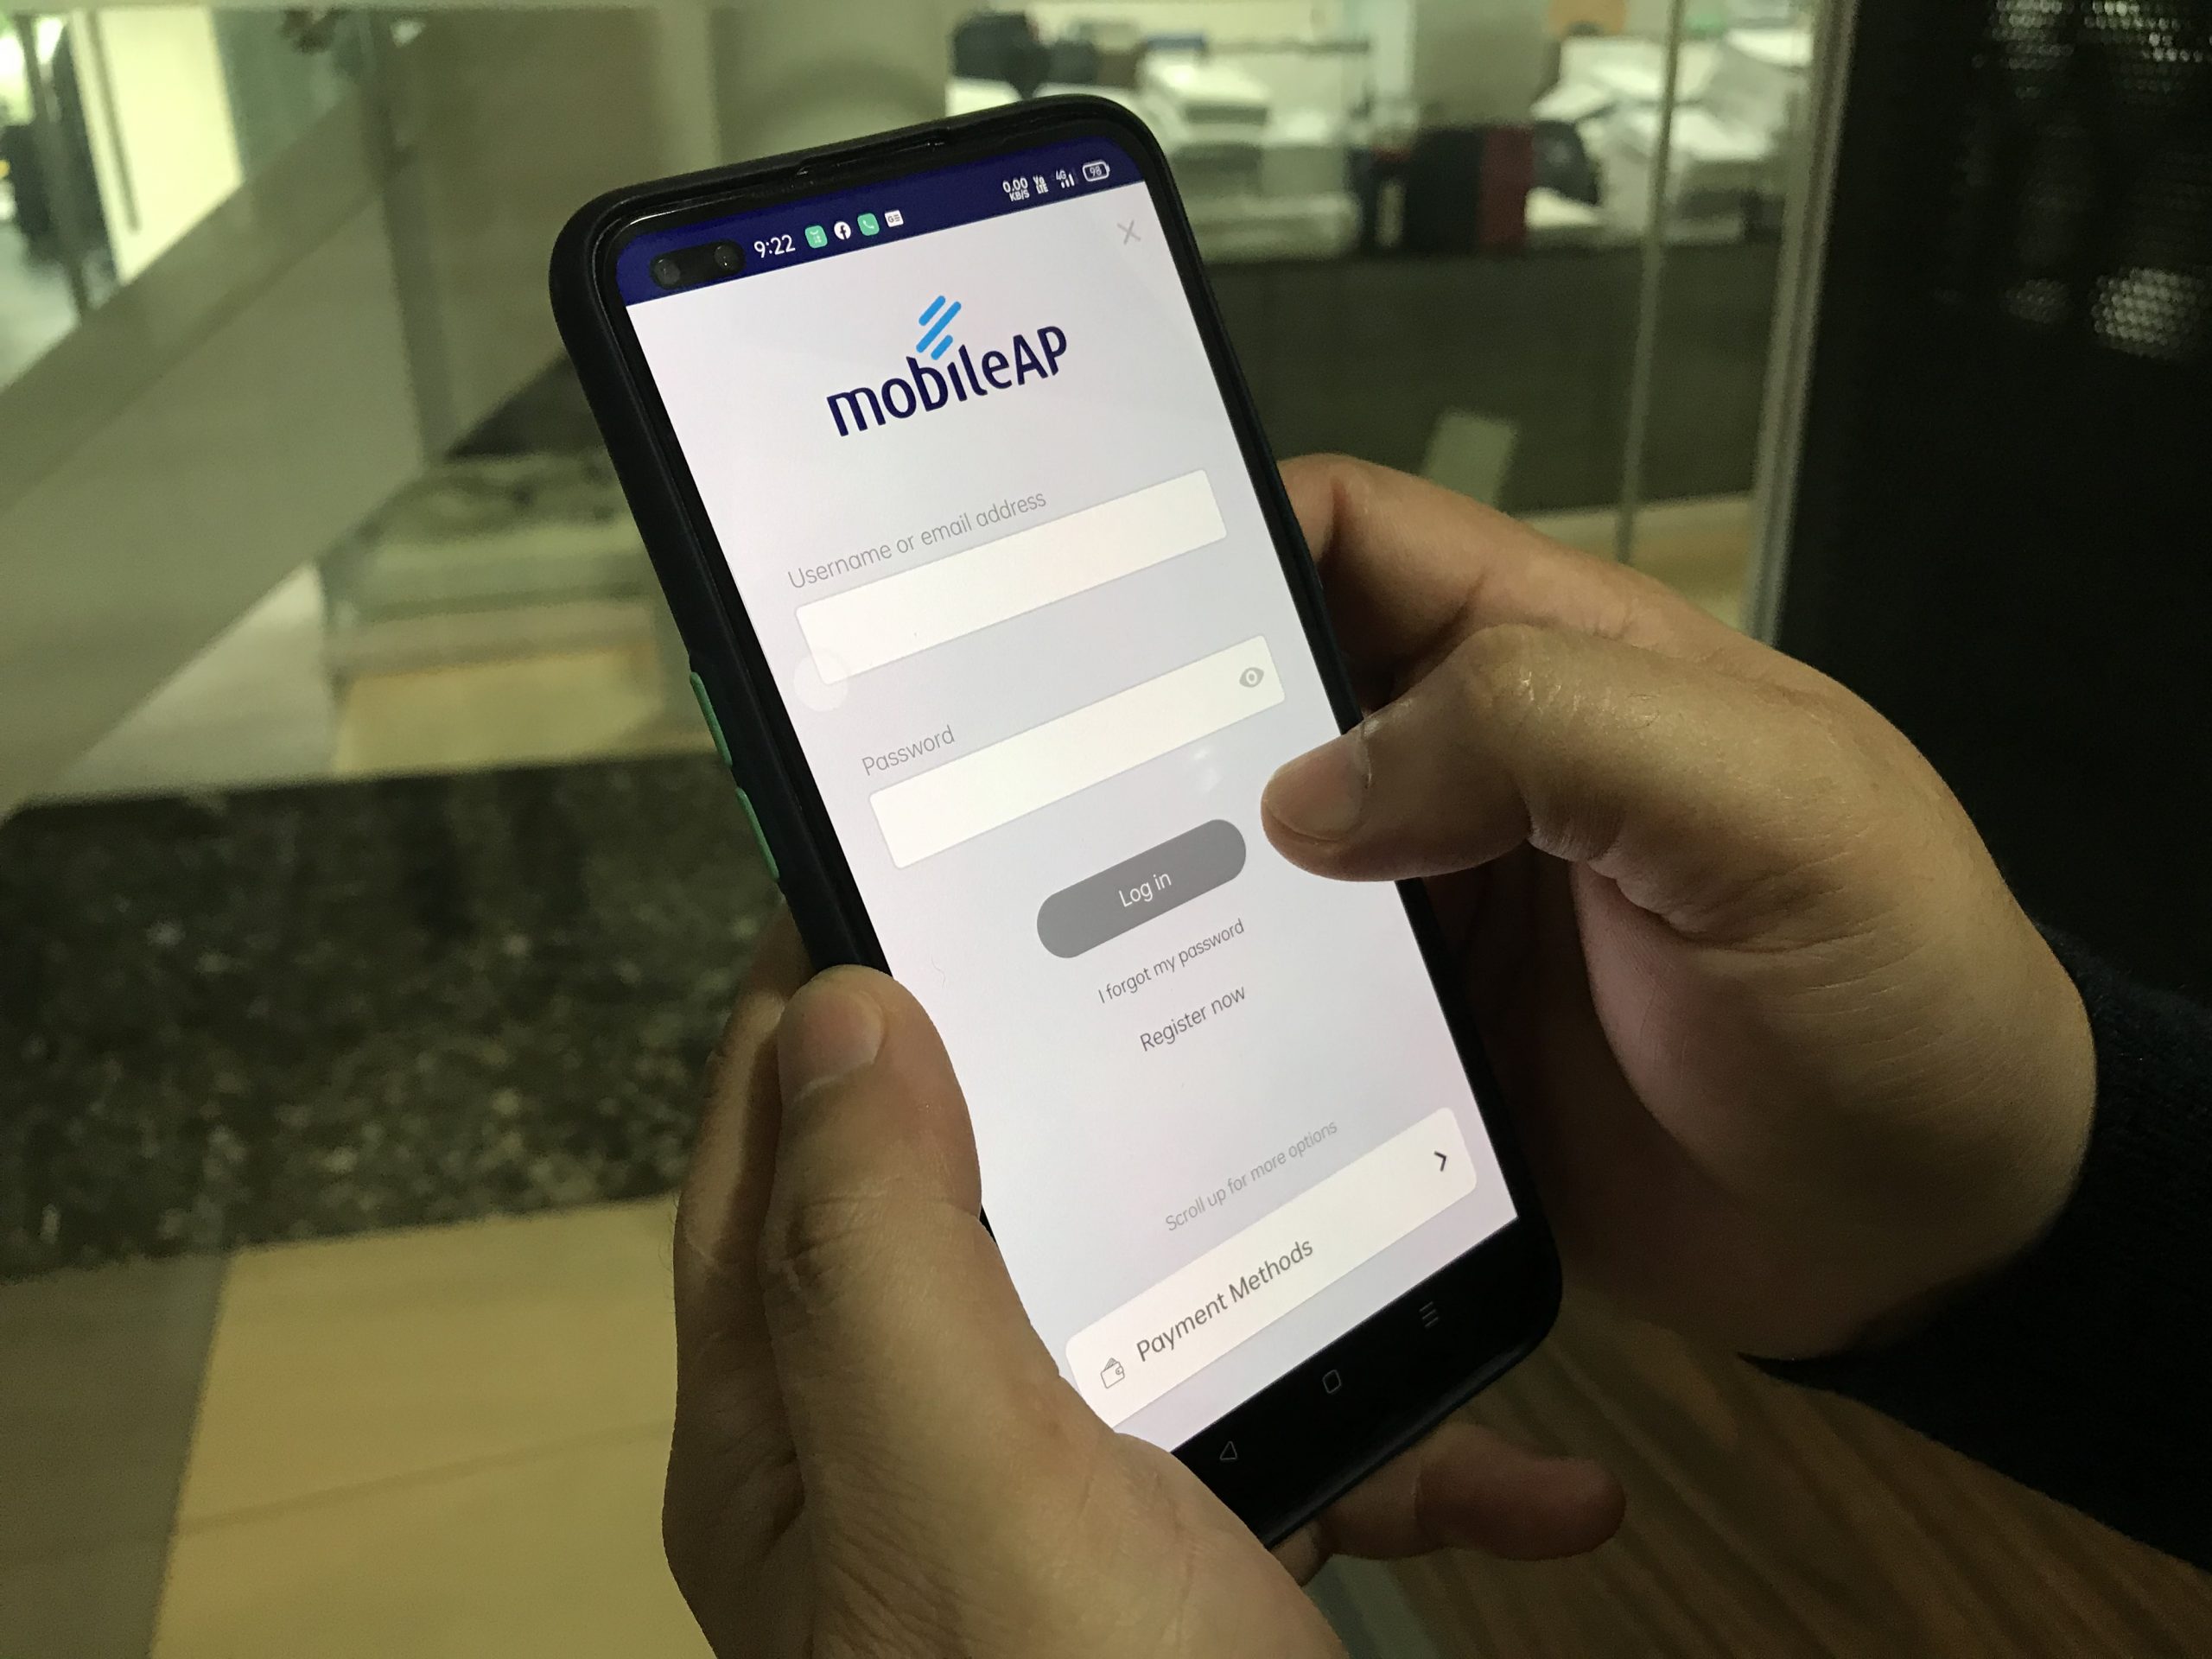 Customers of Davao Light and Power Co., Inc. can now view their monthly electricity bill at their most convenient time through the MobileAP app. In 20